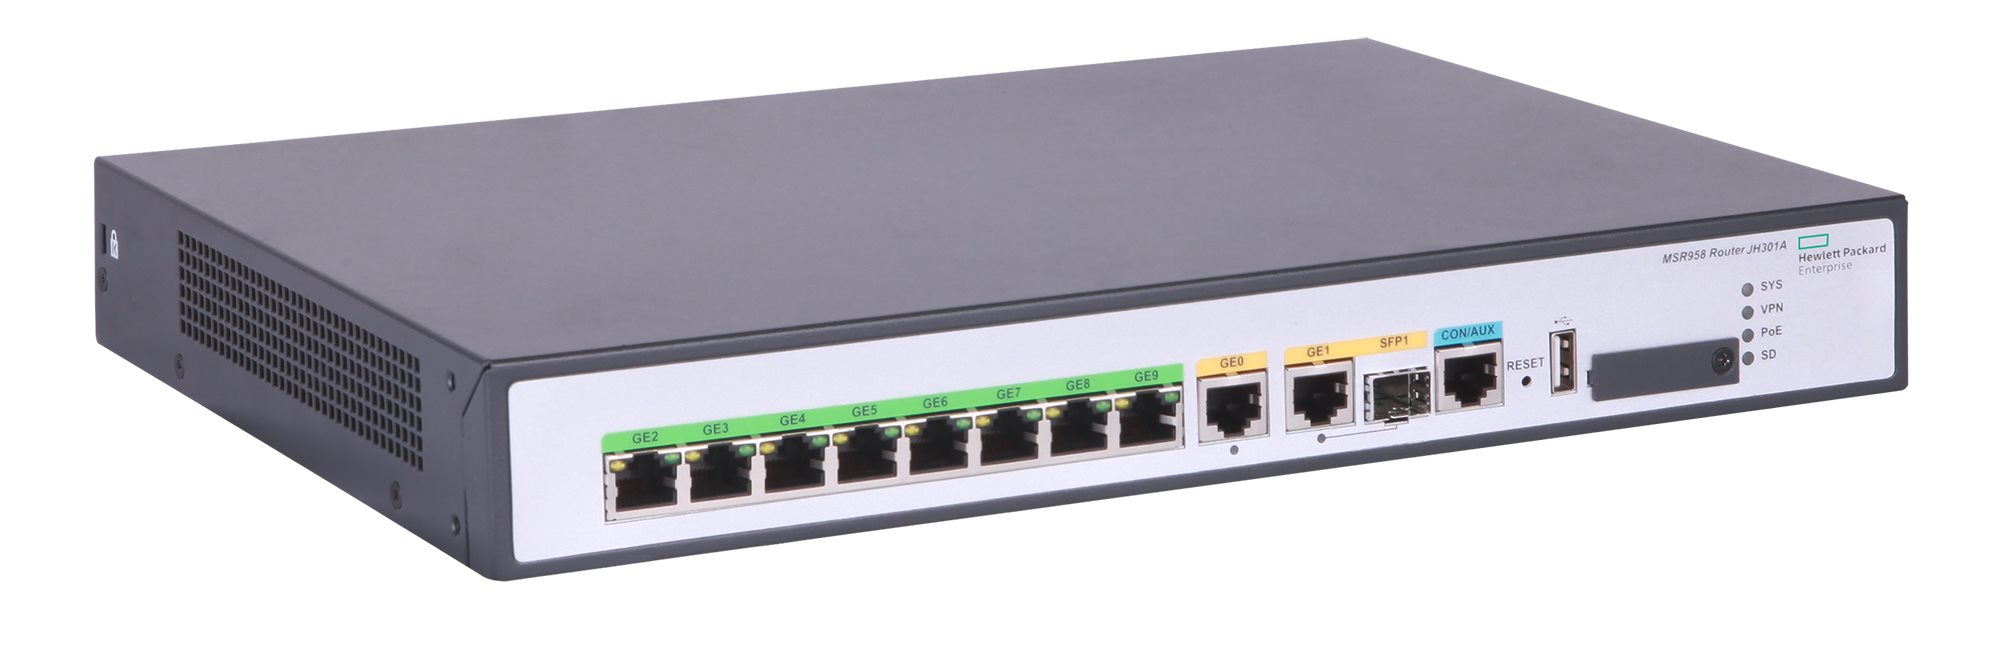 HPE FlexNetwork MSR958 1GbE and Combo 2GbE WAN 8GbE LAN PoE Router1 